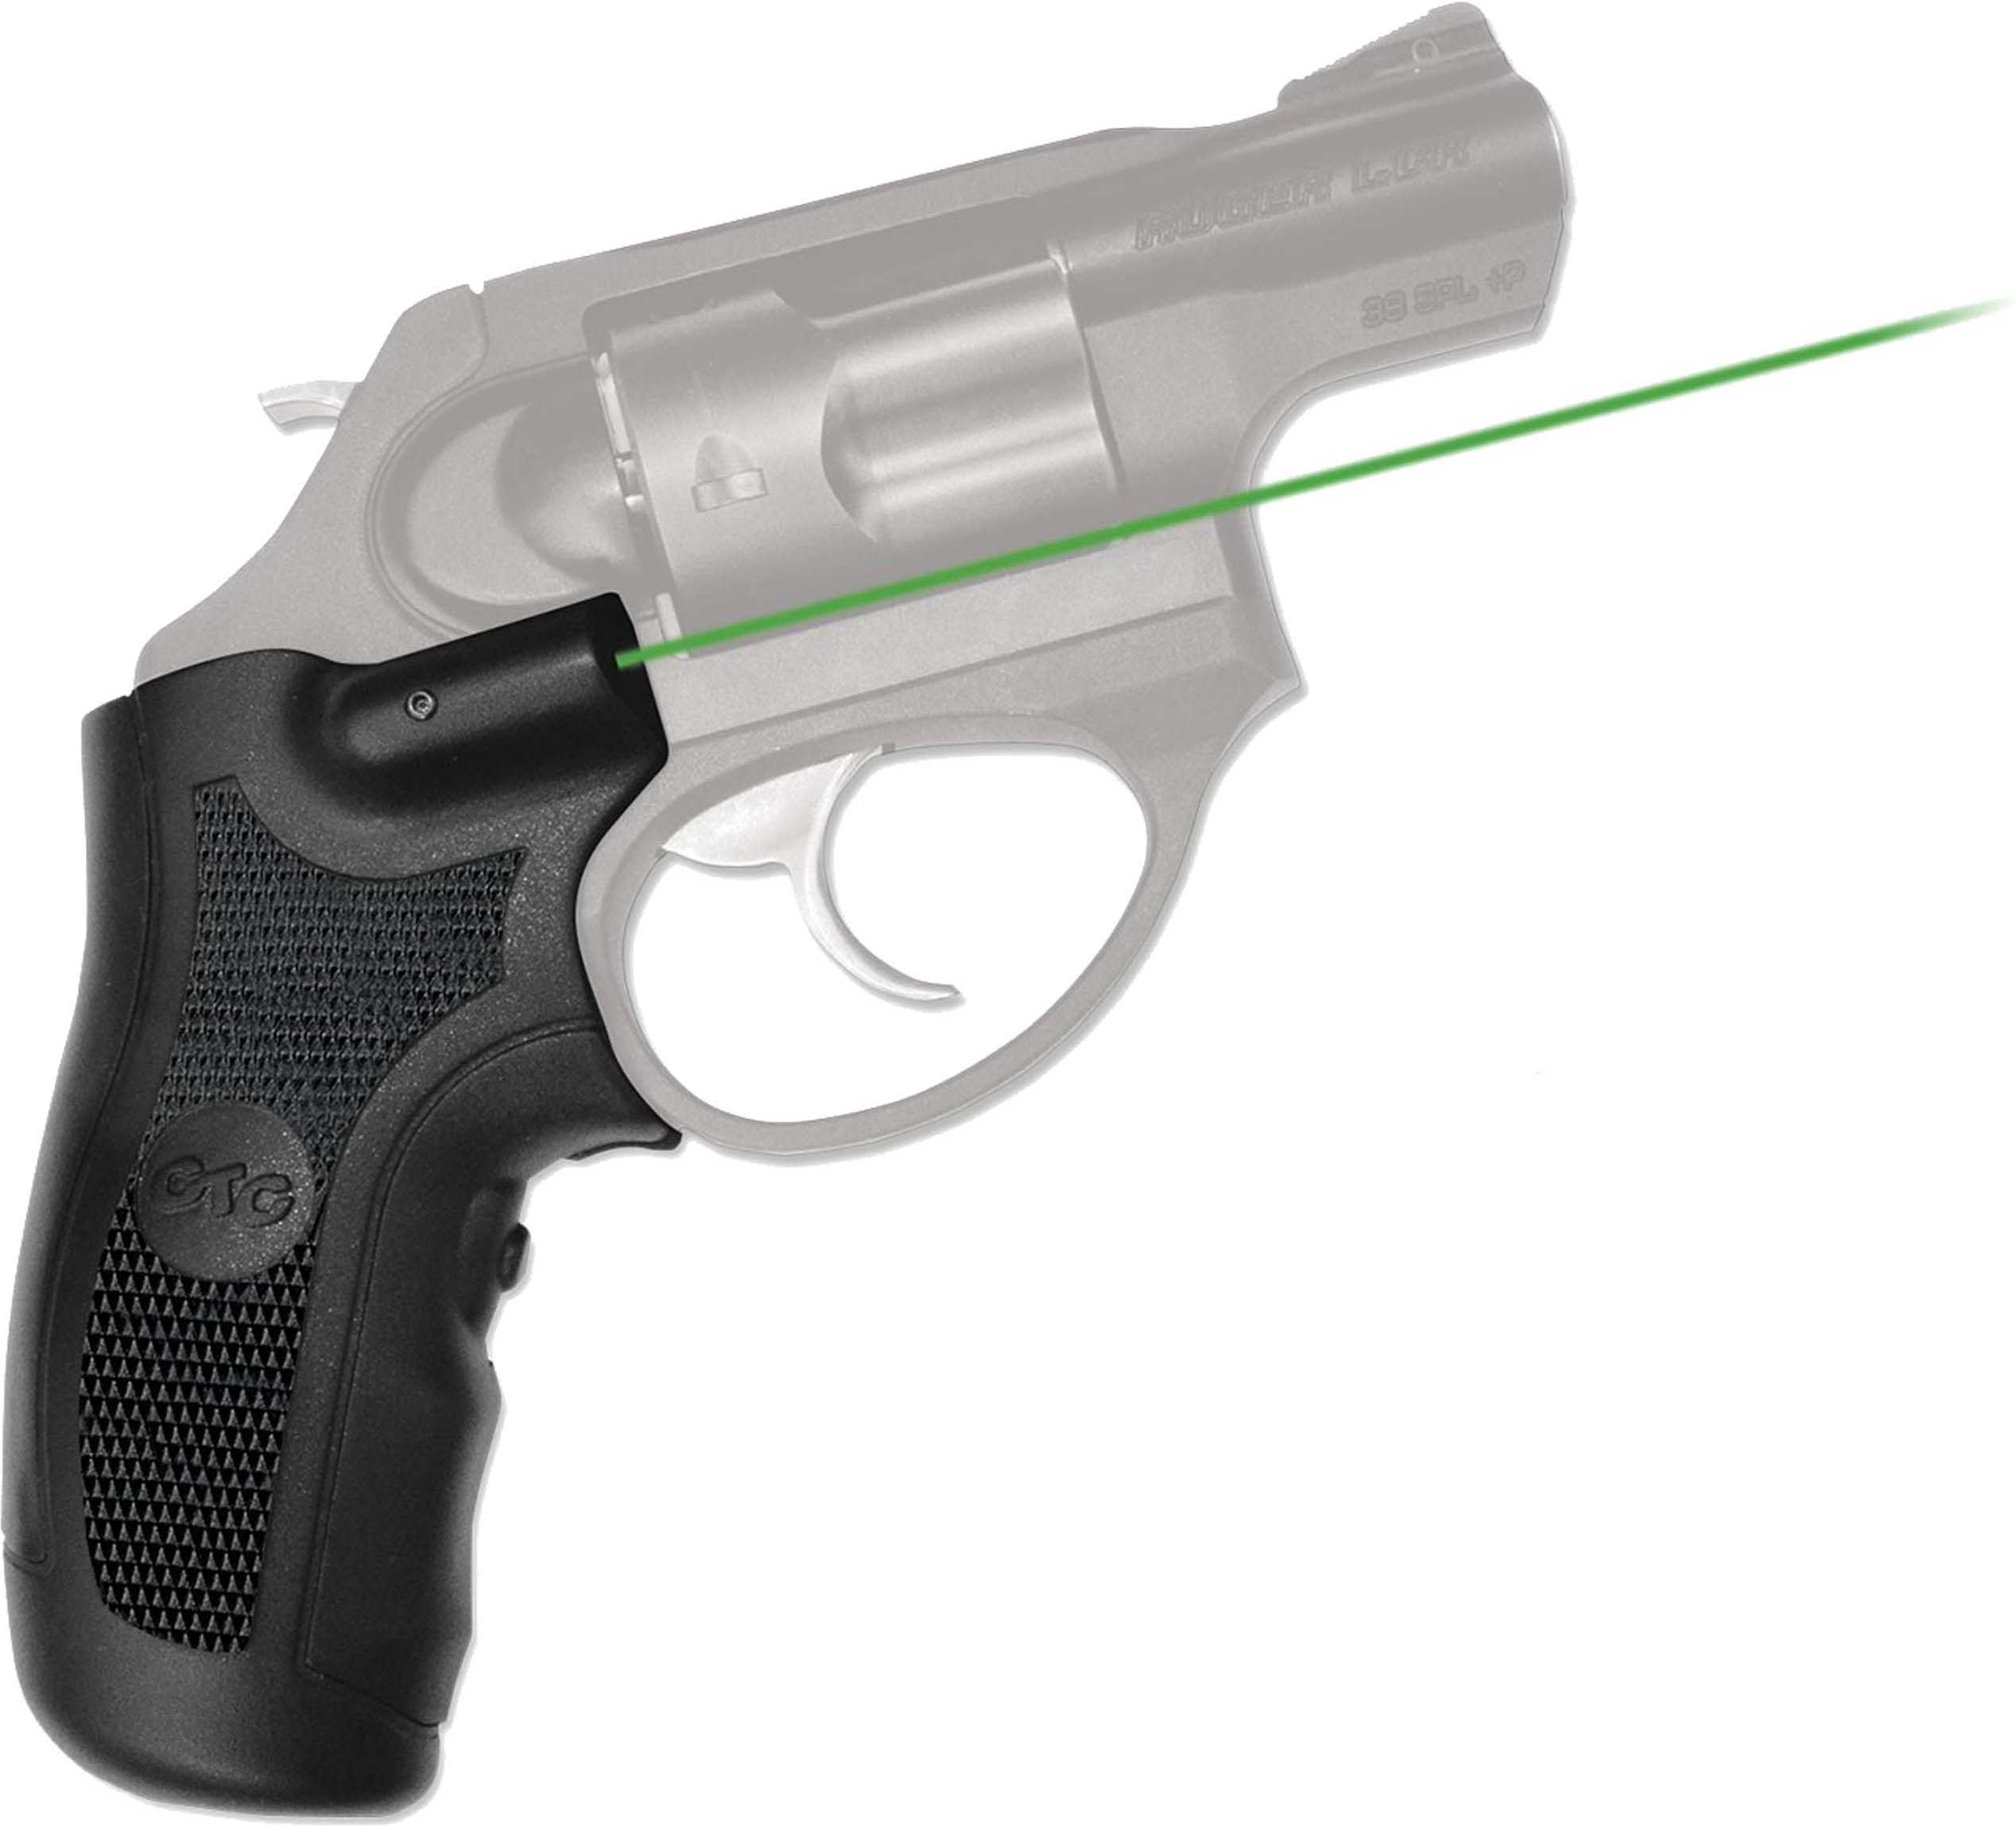 Crimson Trace Lg415g Lasergrips Ruger Lcr/lcrx Green Grip